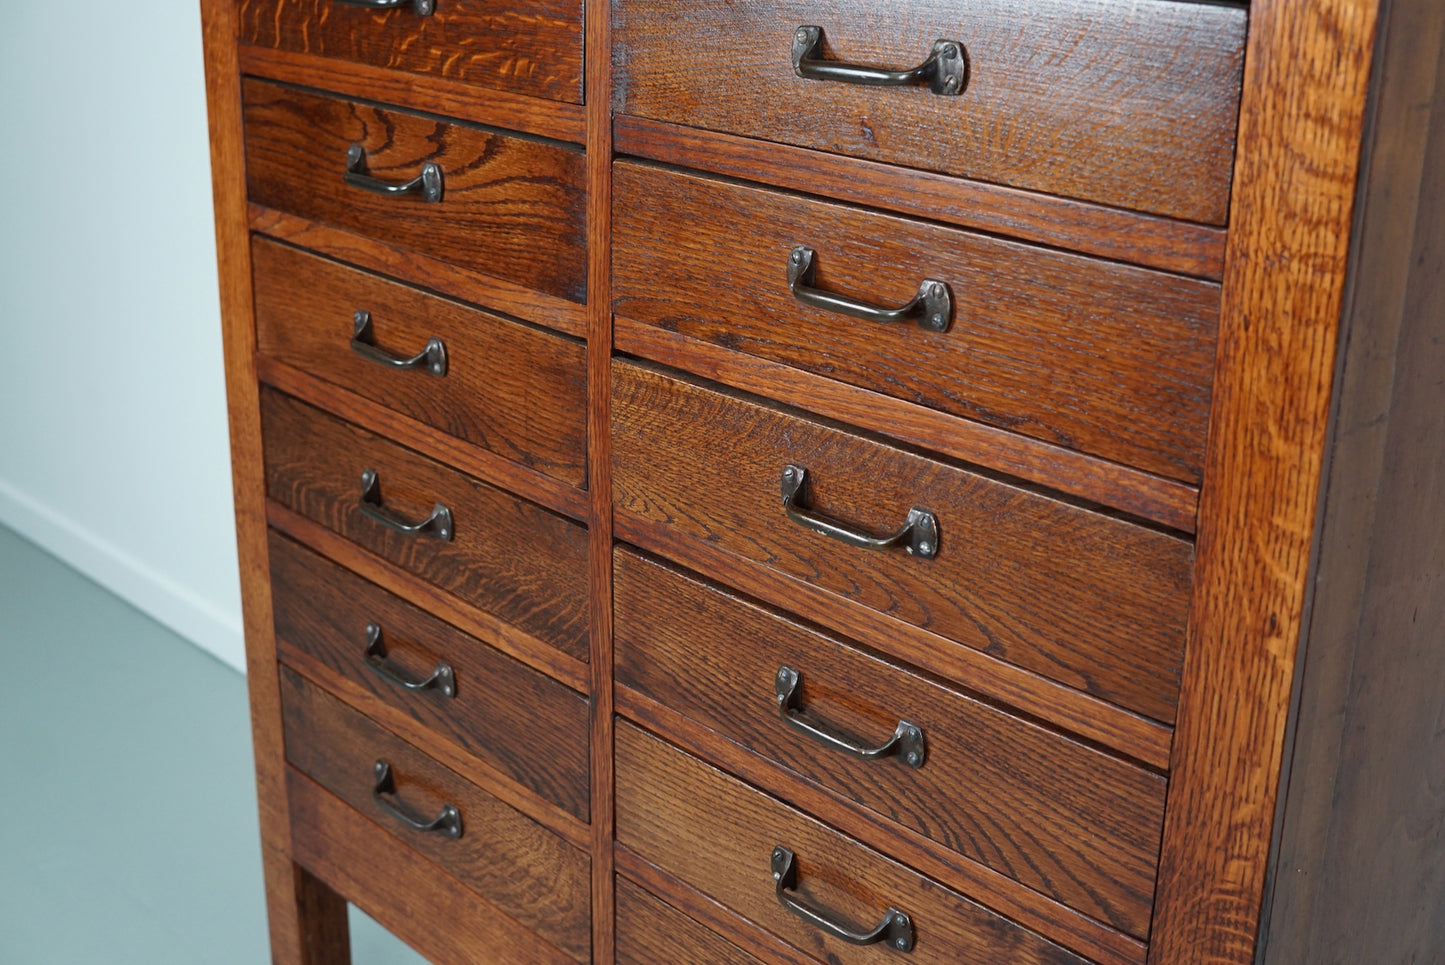 Dutch Oak & Beech Industrial Apothecary or Filing Cabinet, 1930s